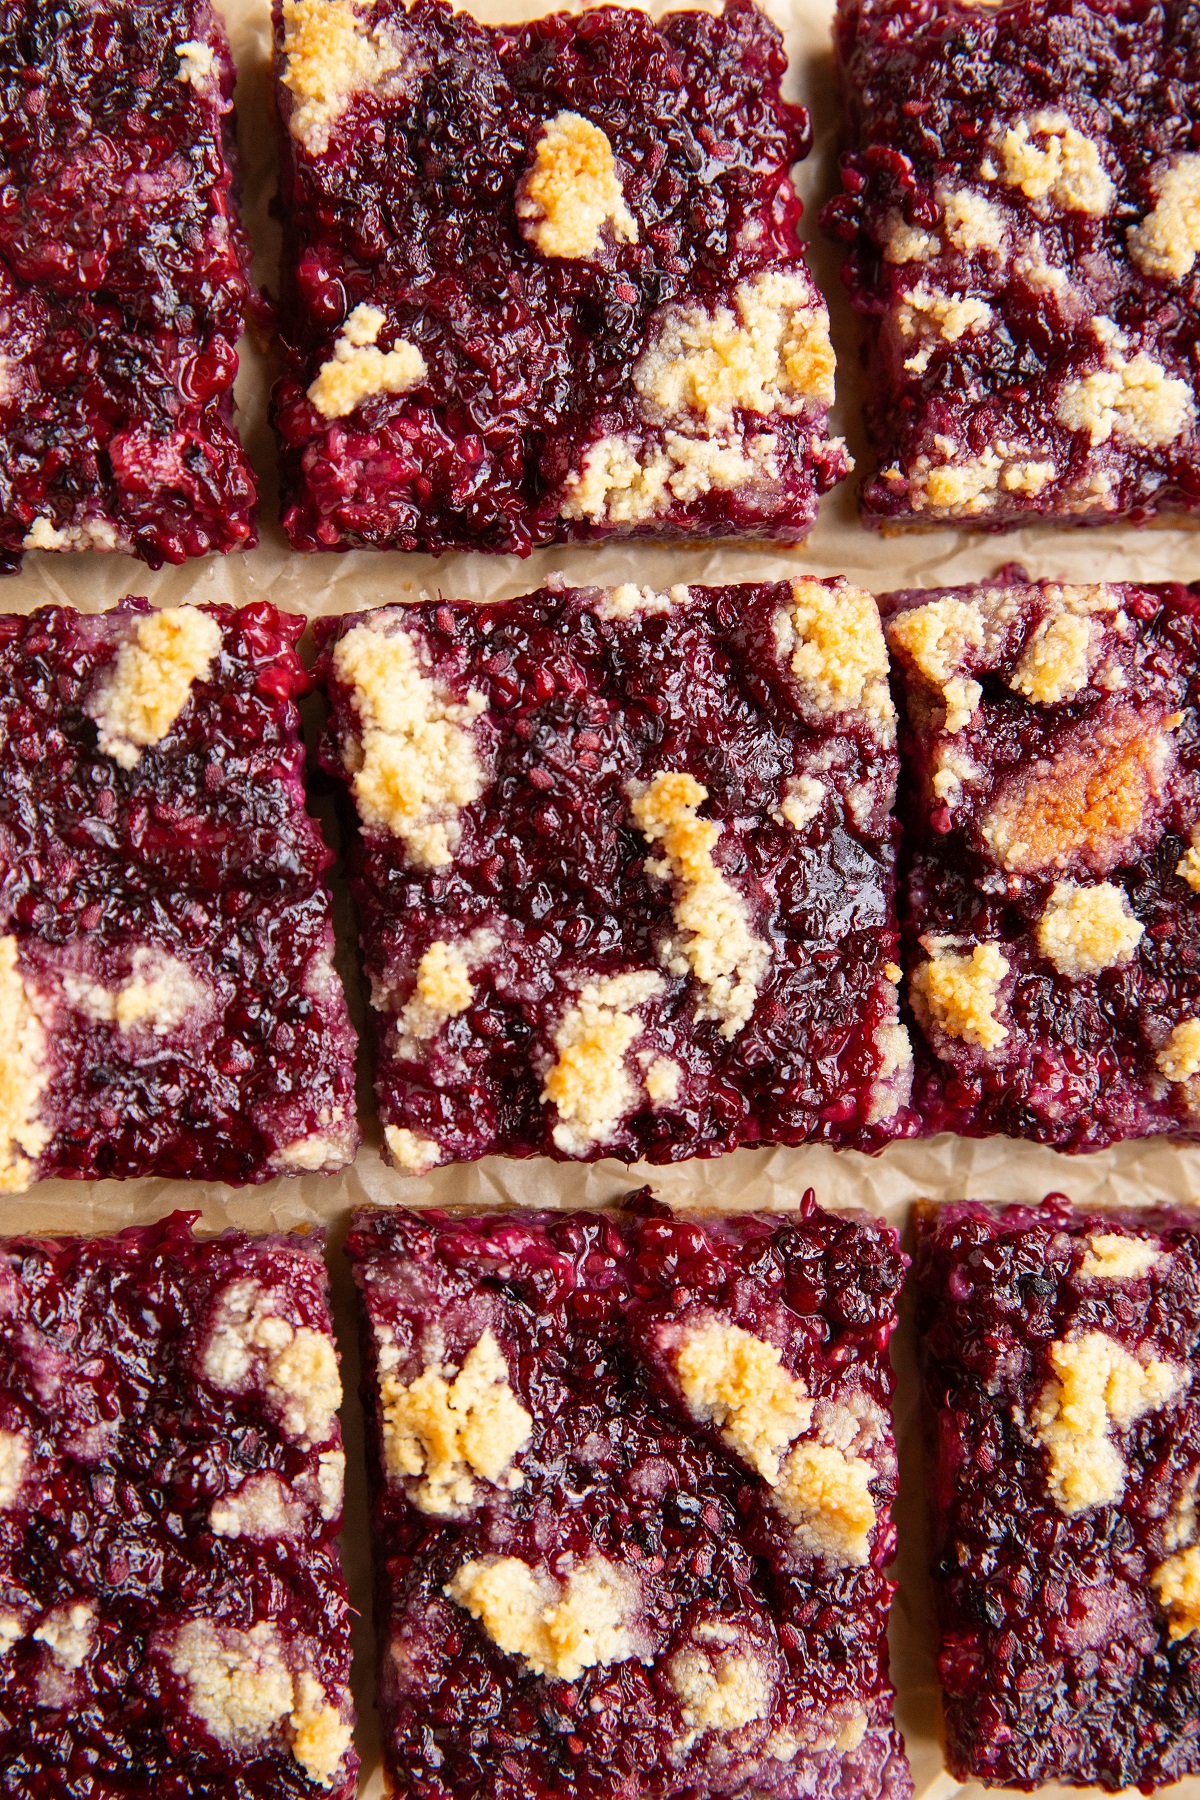 Blackberry Crumb Bars cut into individual portions on a sheet of parchment paper.